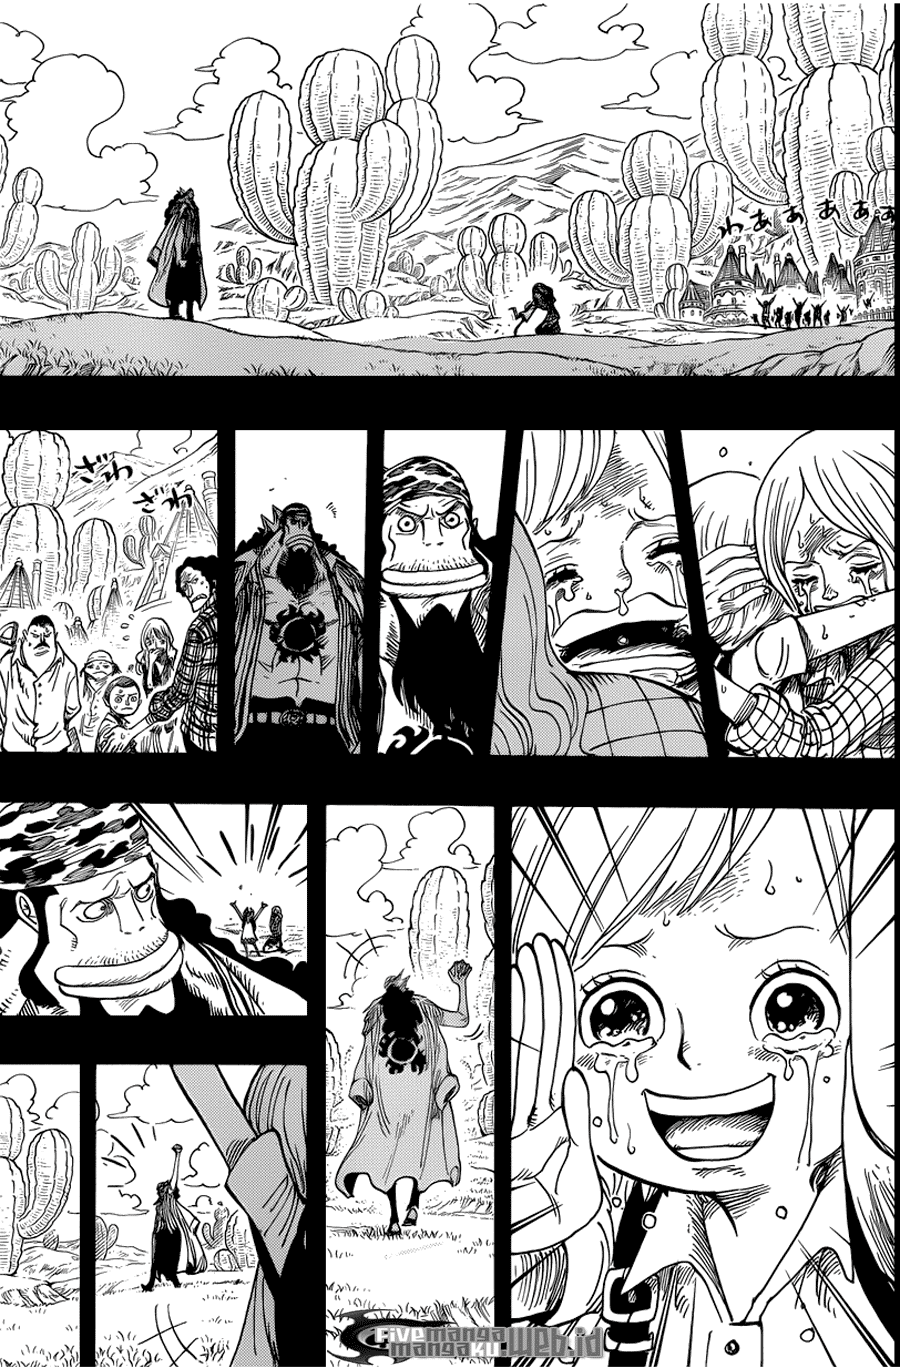 One Piece Chapter 623 – Si Bajak Laut Fisher Tiger - 137